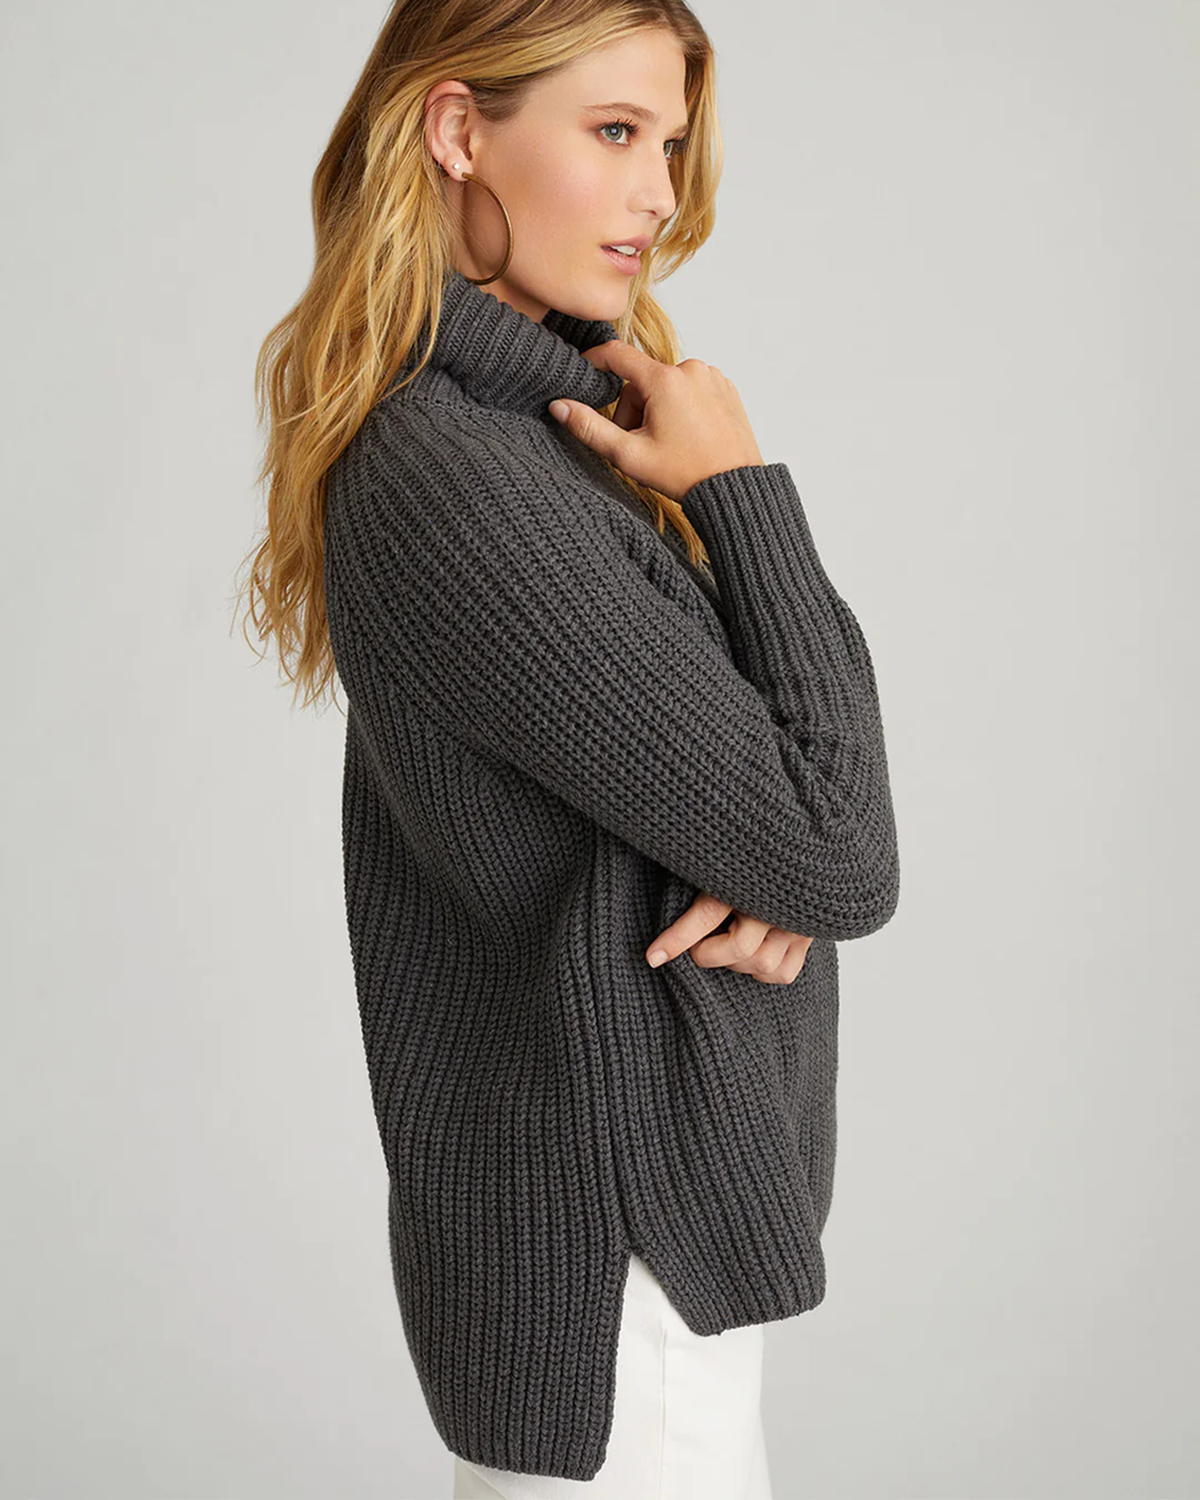 Stella Pullover in Charcoal Heather